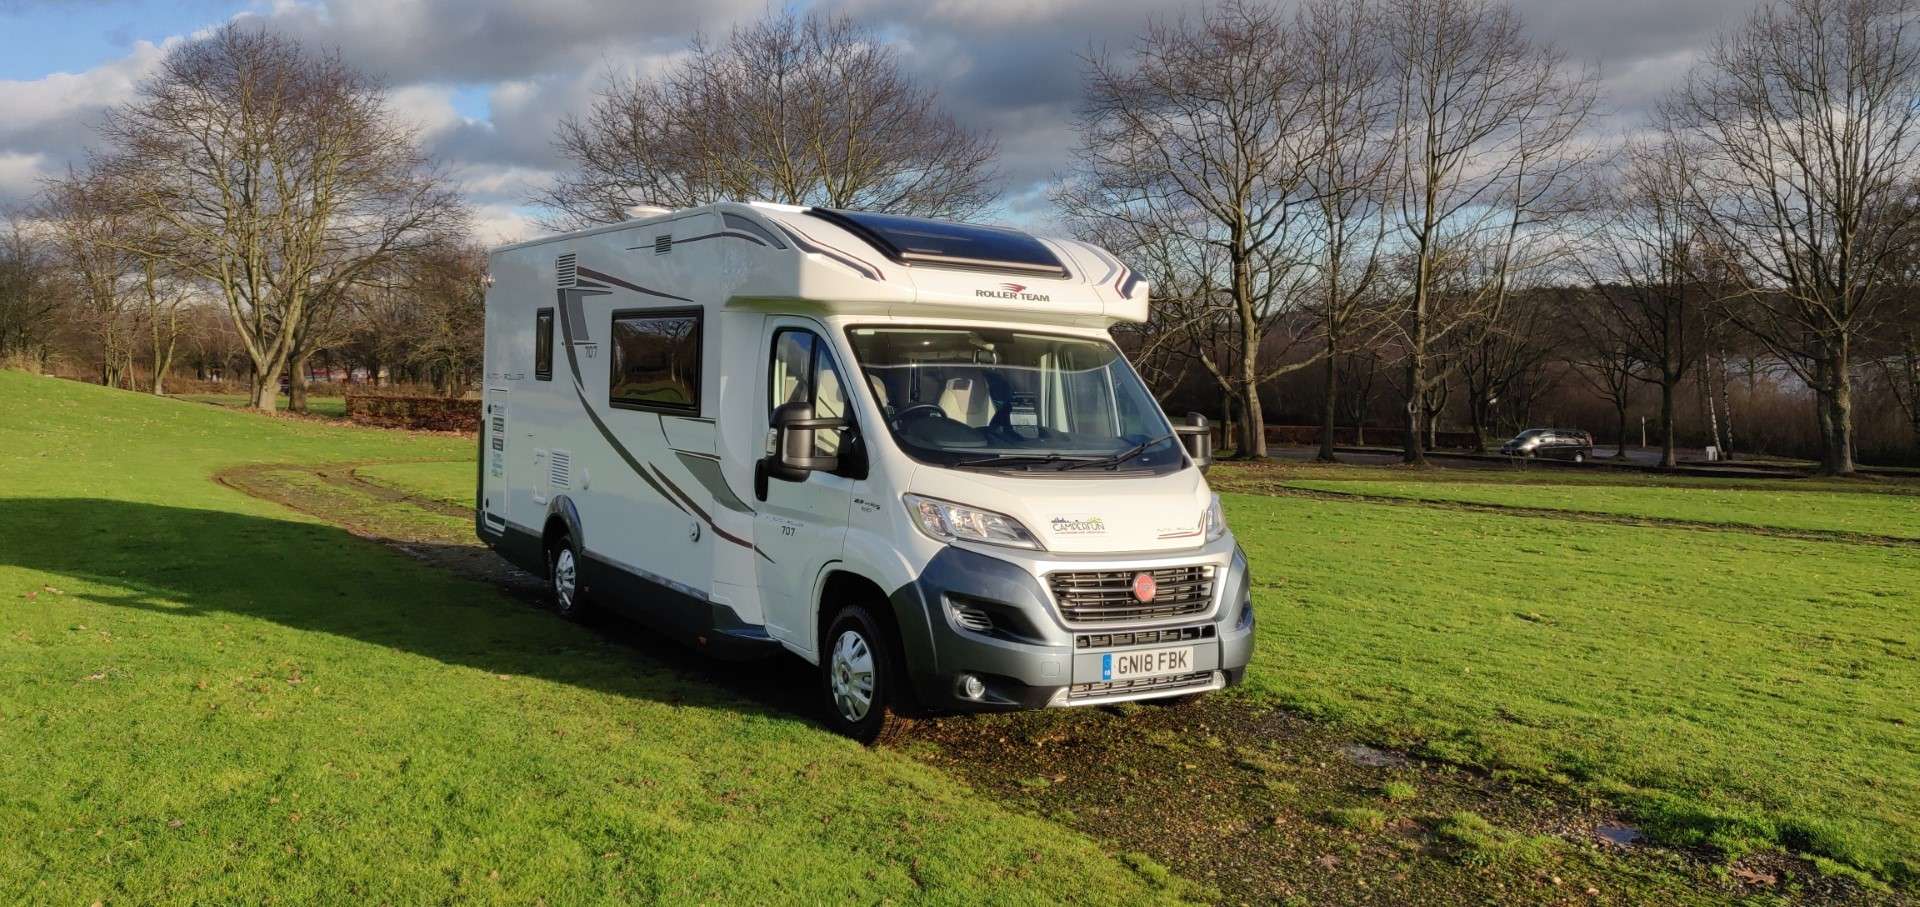 Motorhome hire sussex